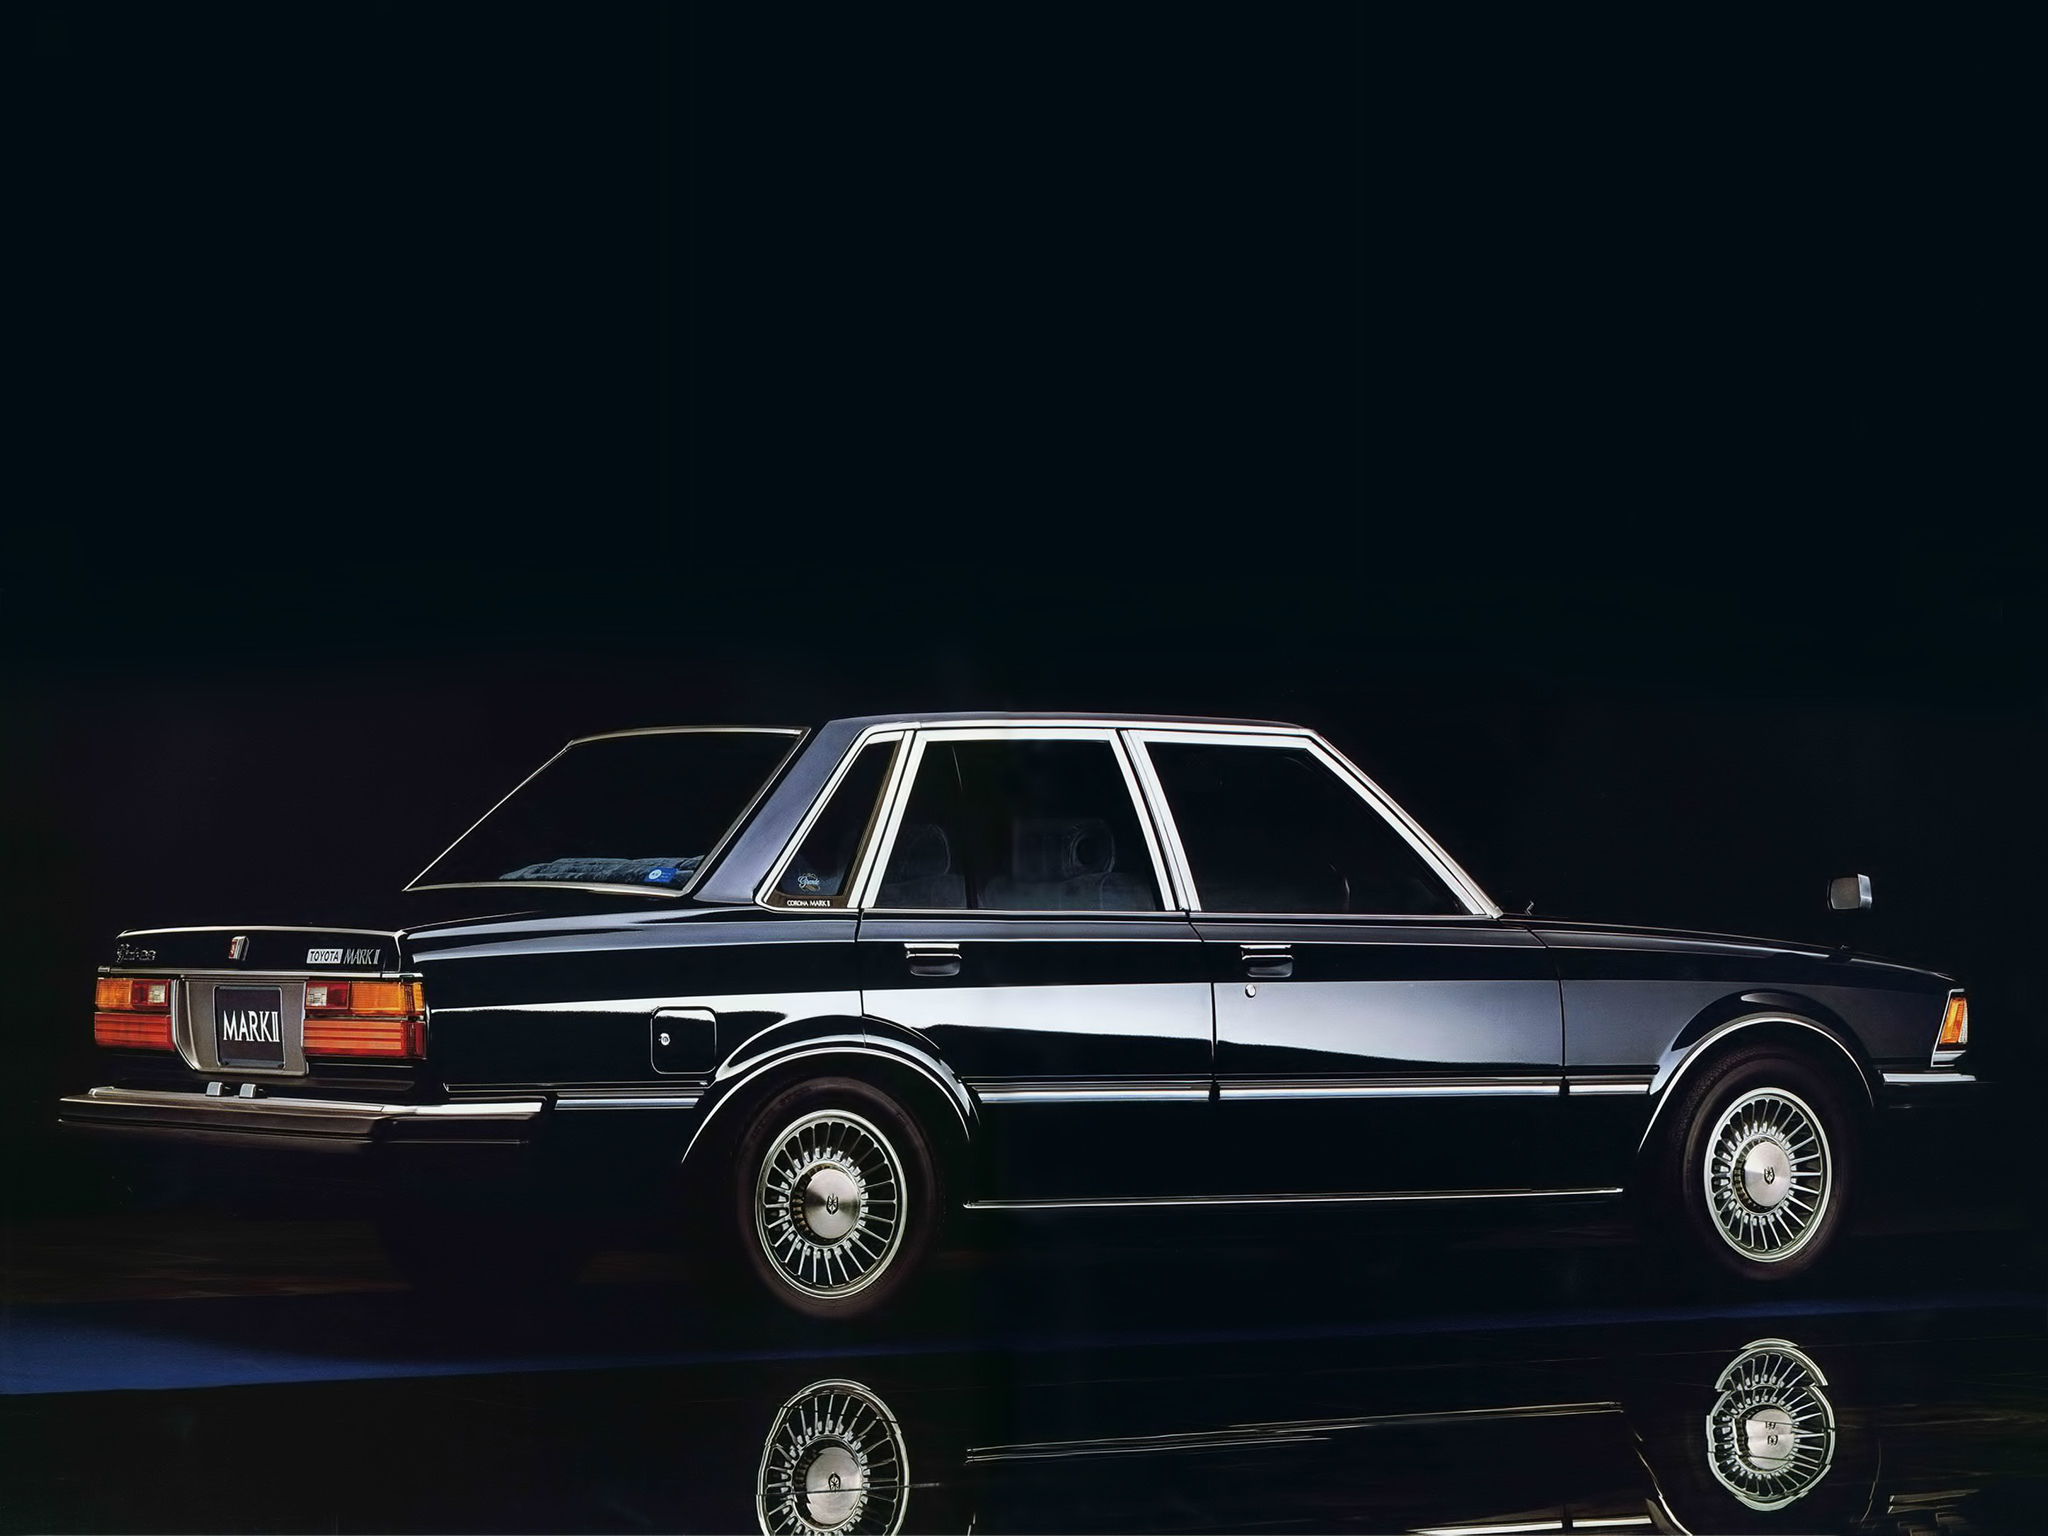 Toyota has discontinued production of the iconic Mark model - Toyota, Toyota Mark II, Auto, Story, Longpost, The photo